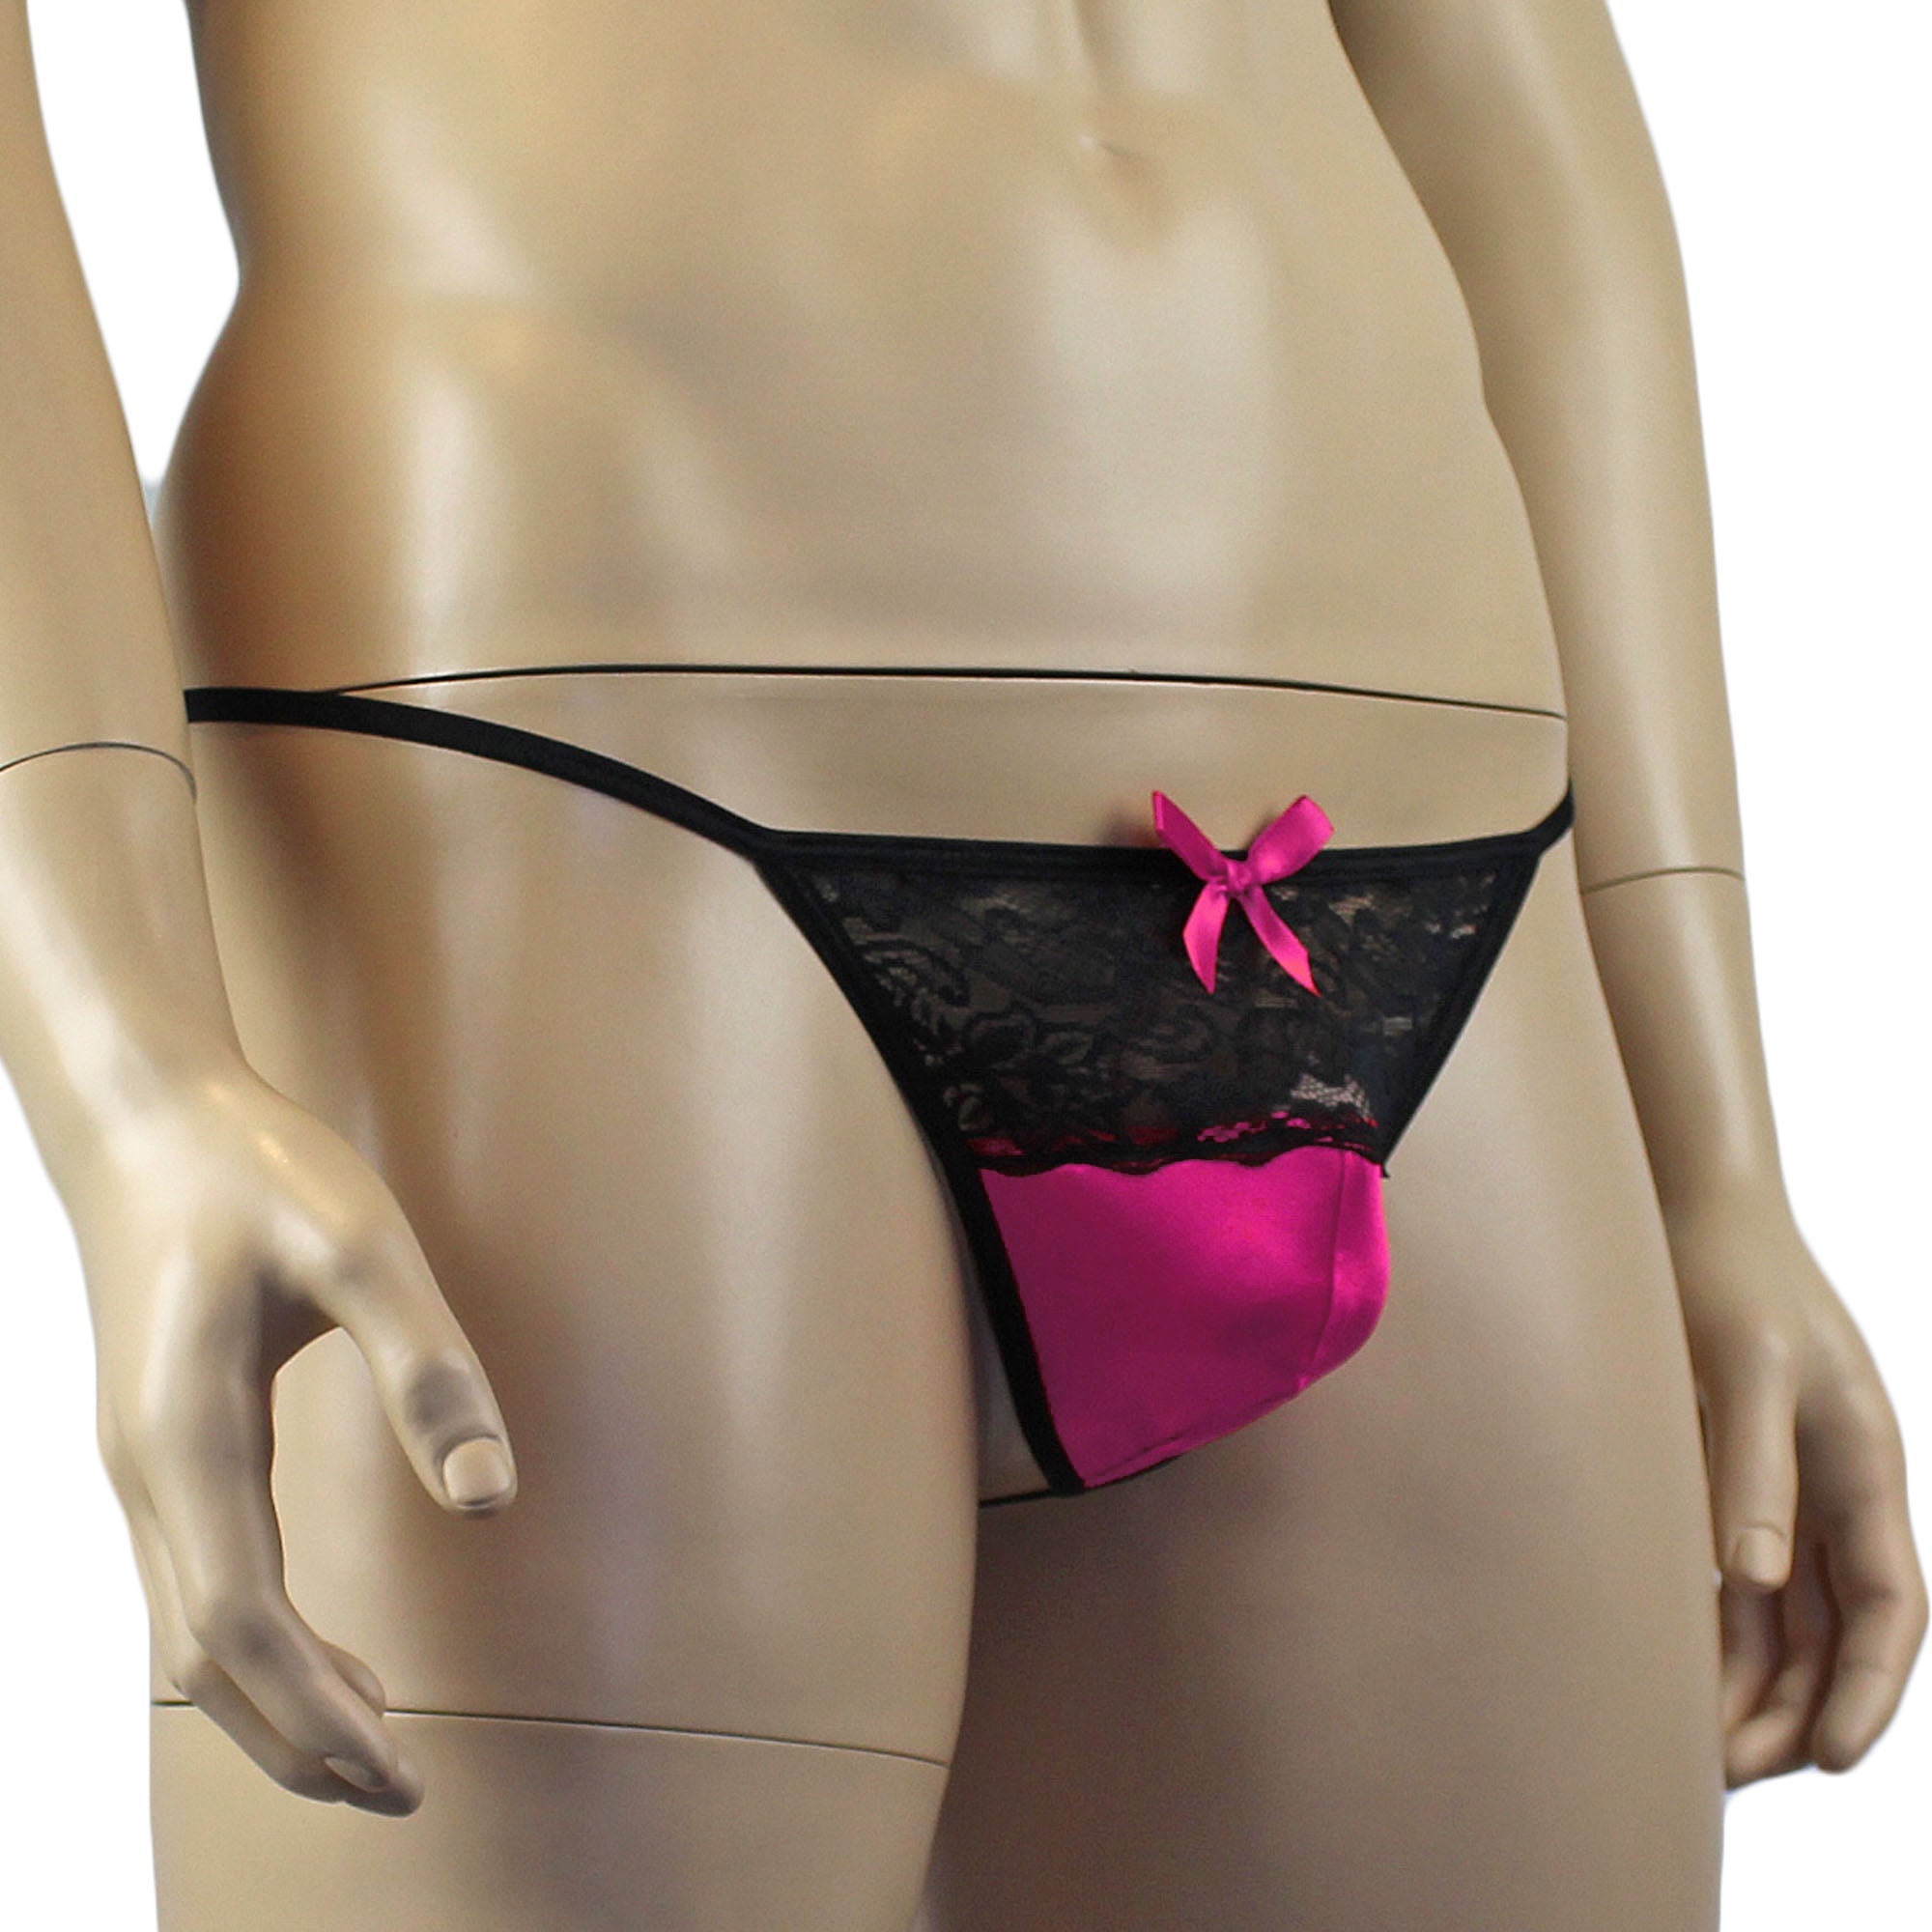 Mens Joanne Lacey G string with Bow Hot Pink and Black Lace